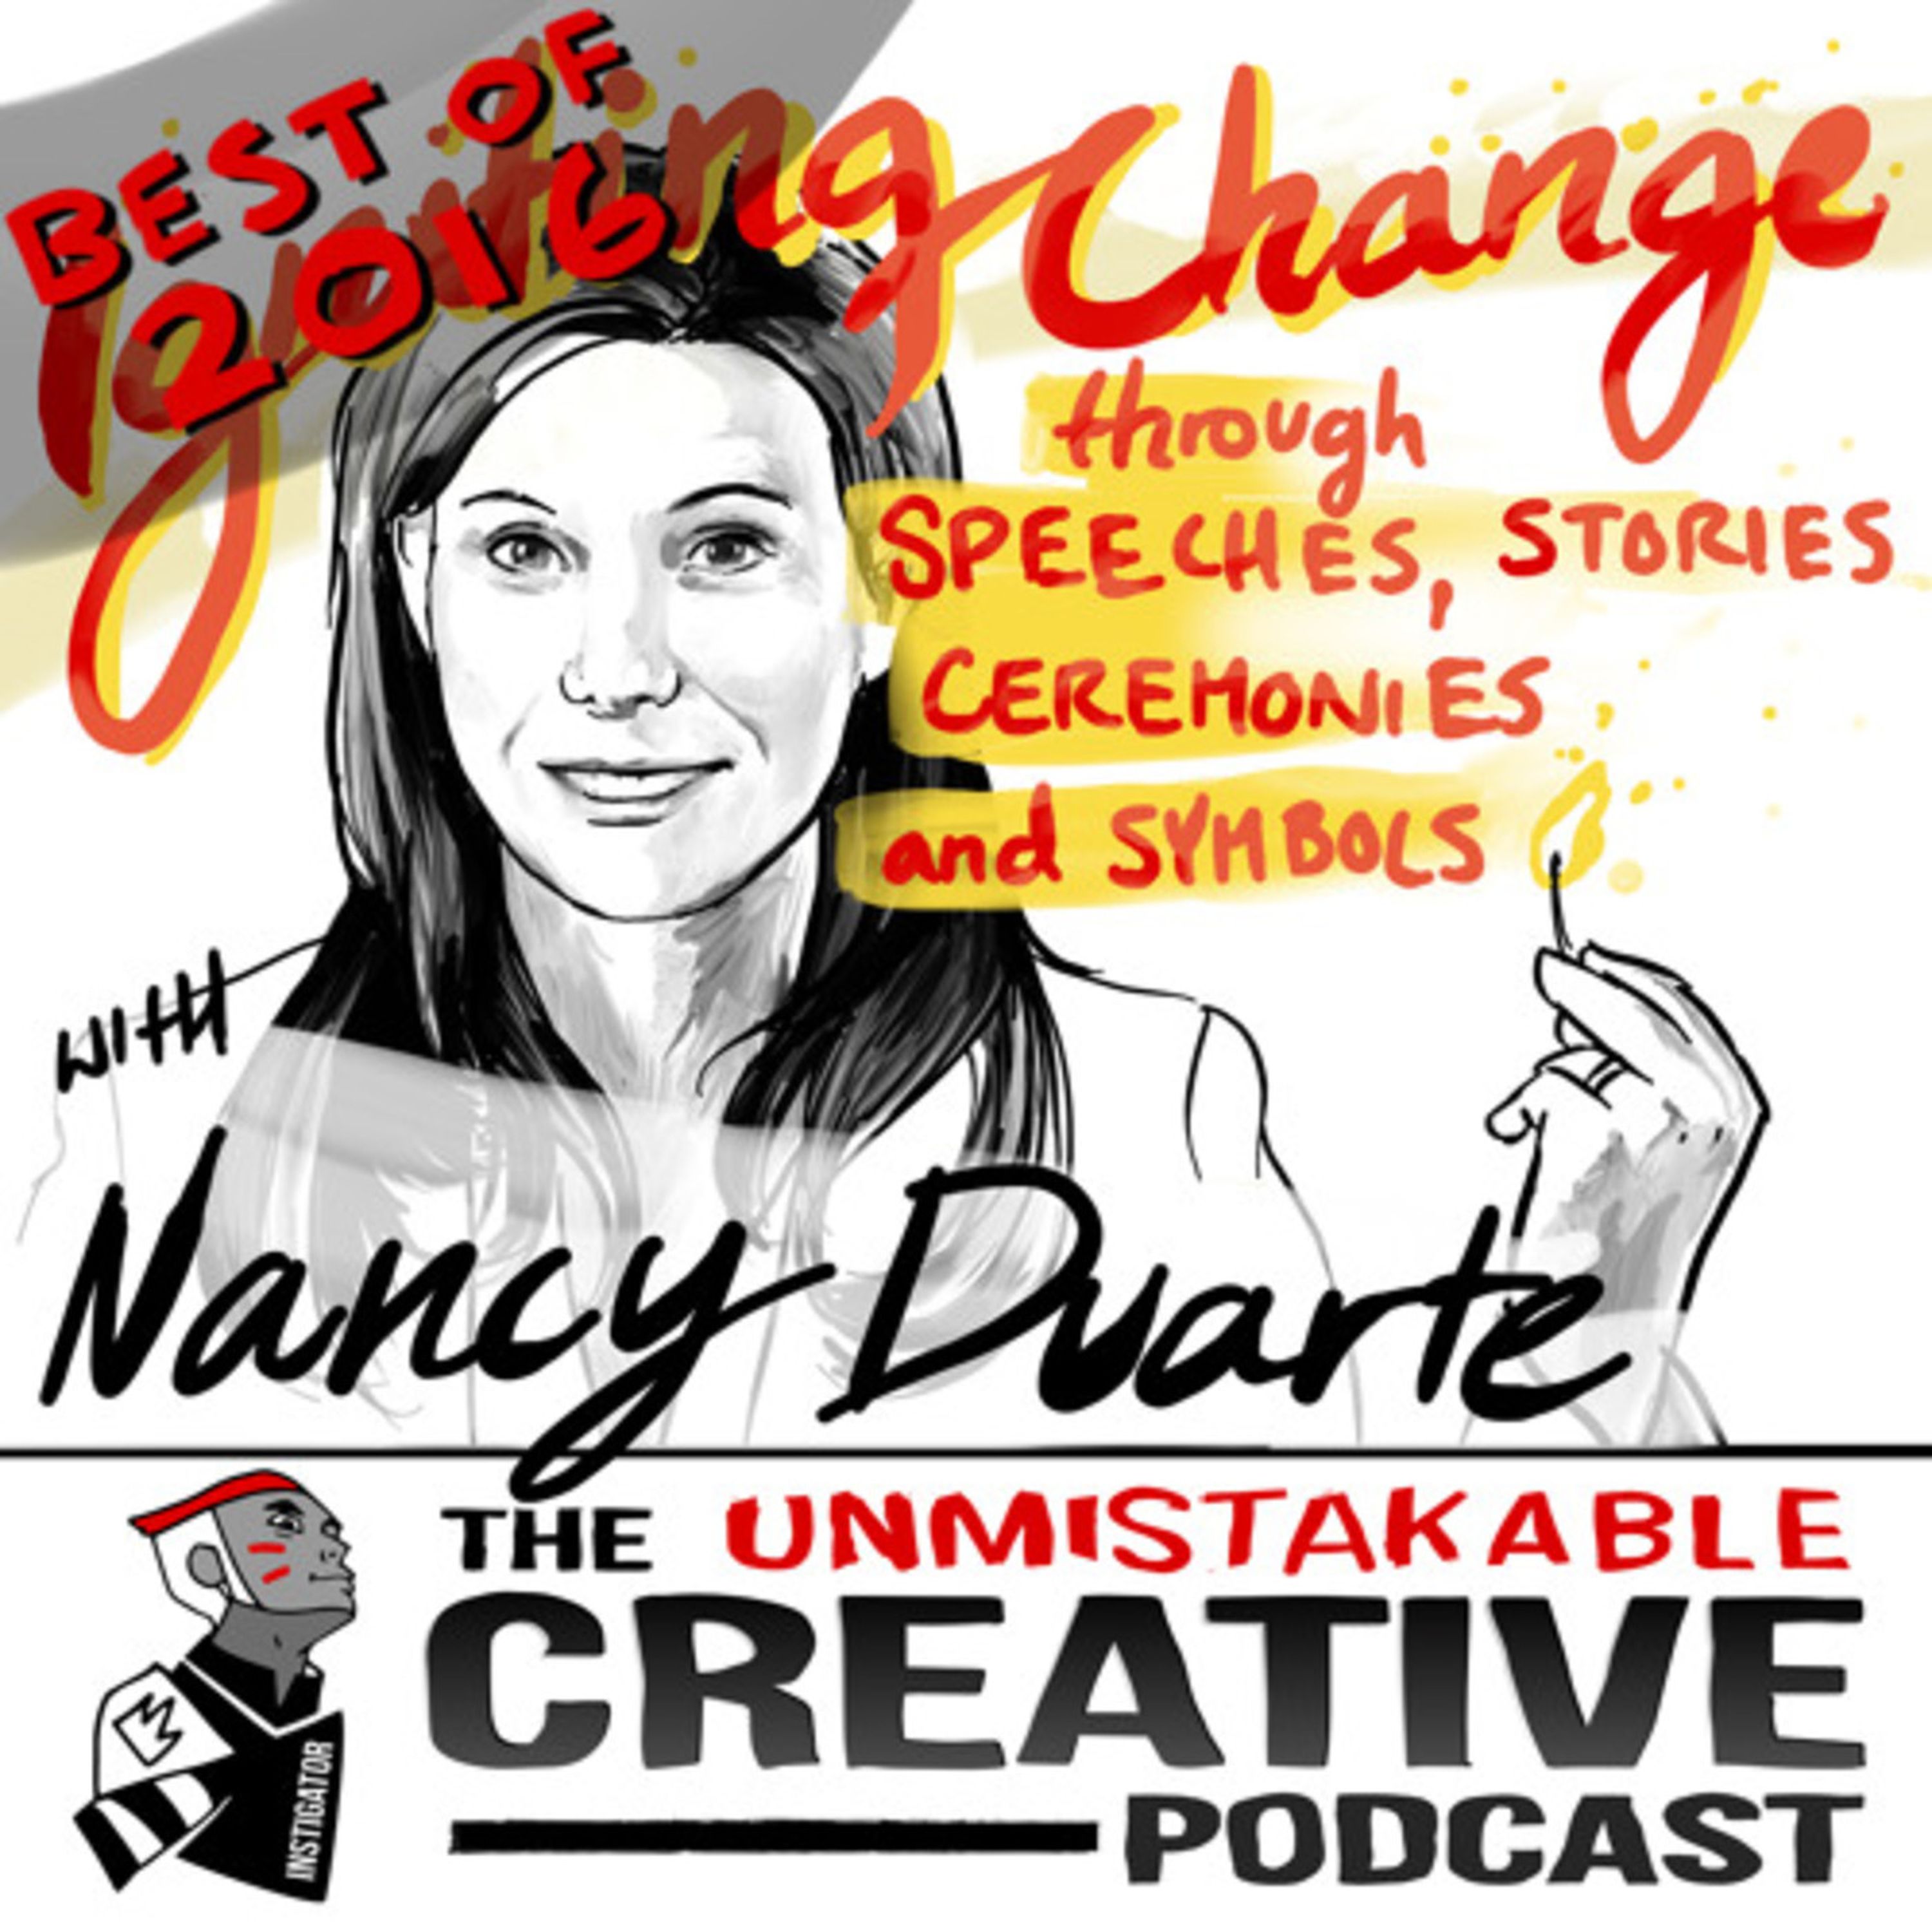 Best of 2016: Igniting Change Through Speeches, Stories, Ceremonies and Symbols with Nancy Duarte